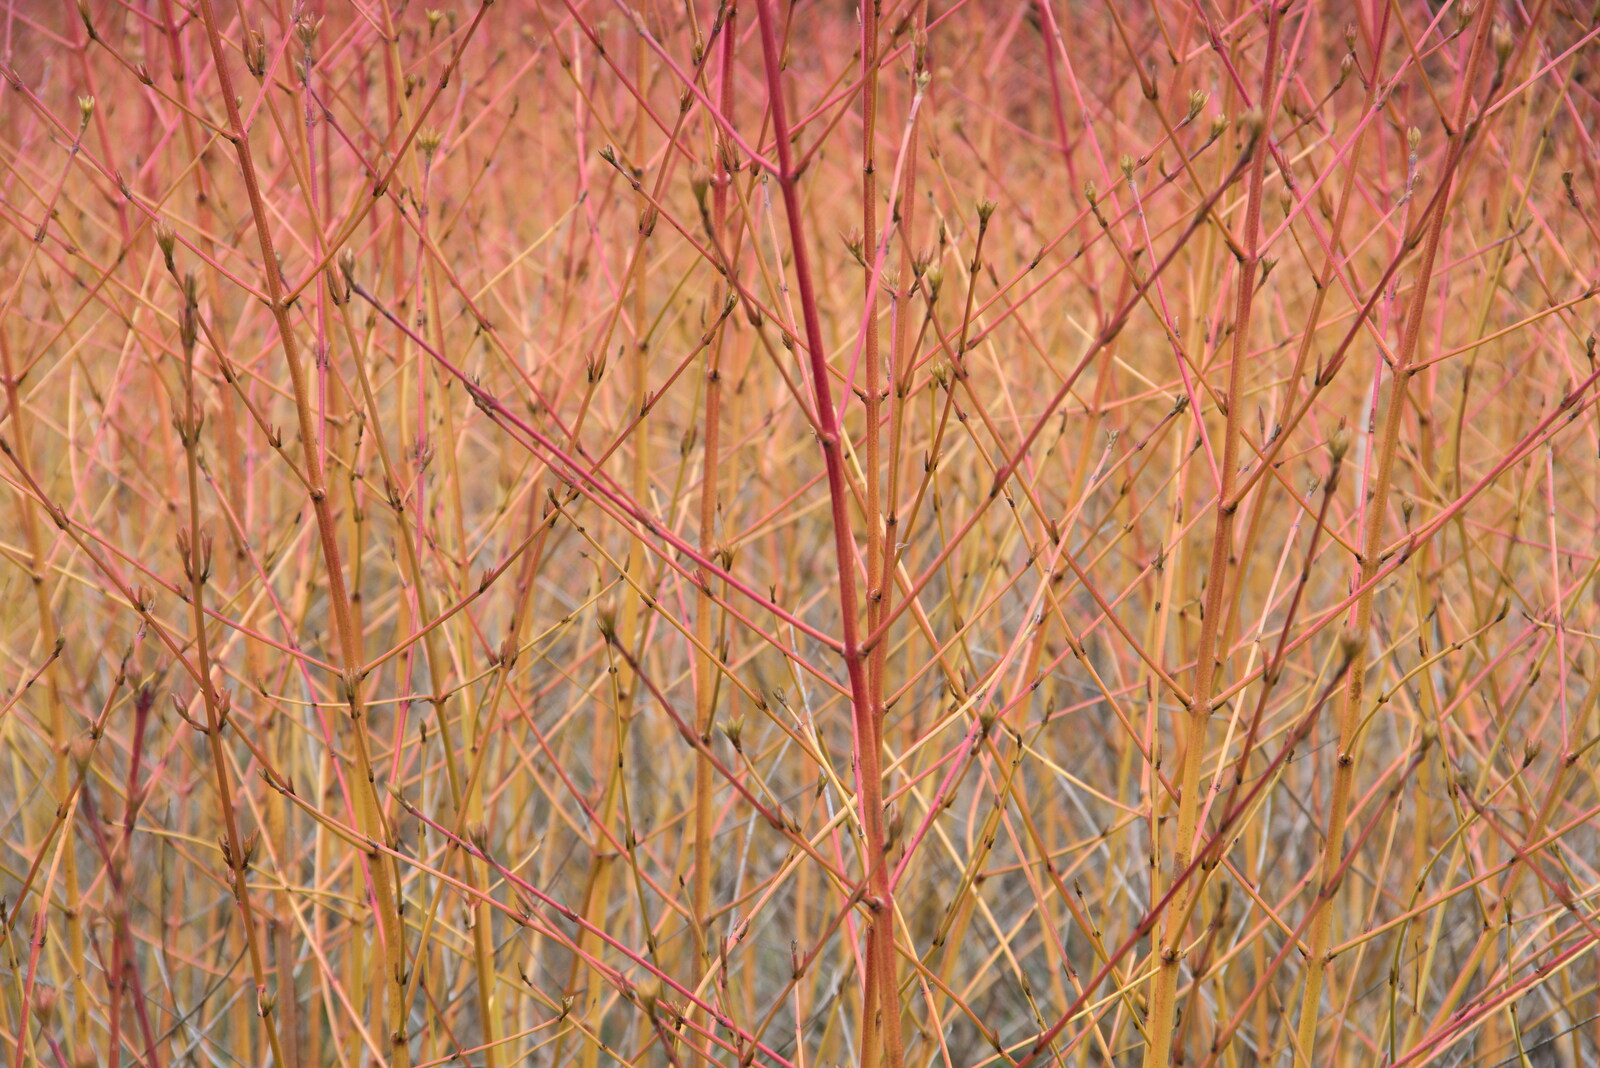 Red-tinged plants in the Winter Garden from A Return to Bressingham Steam and Gardens, Bressingham, Norfolk - 28th March 2021